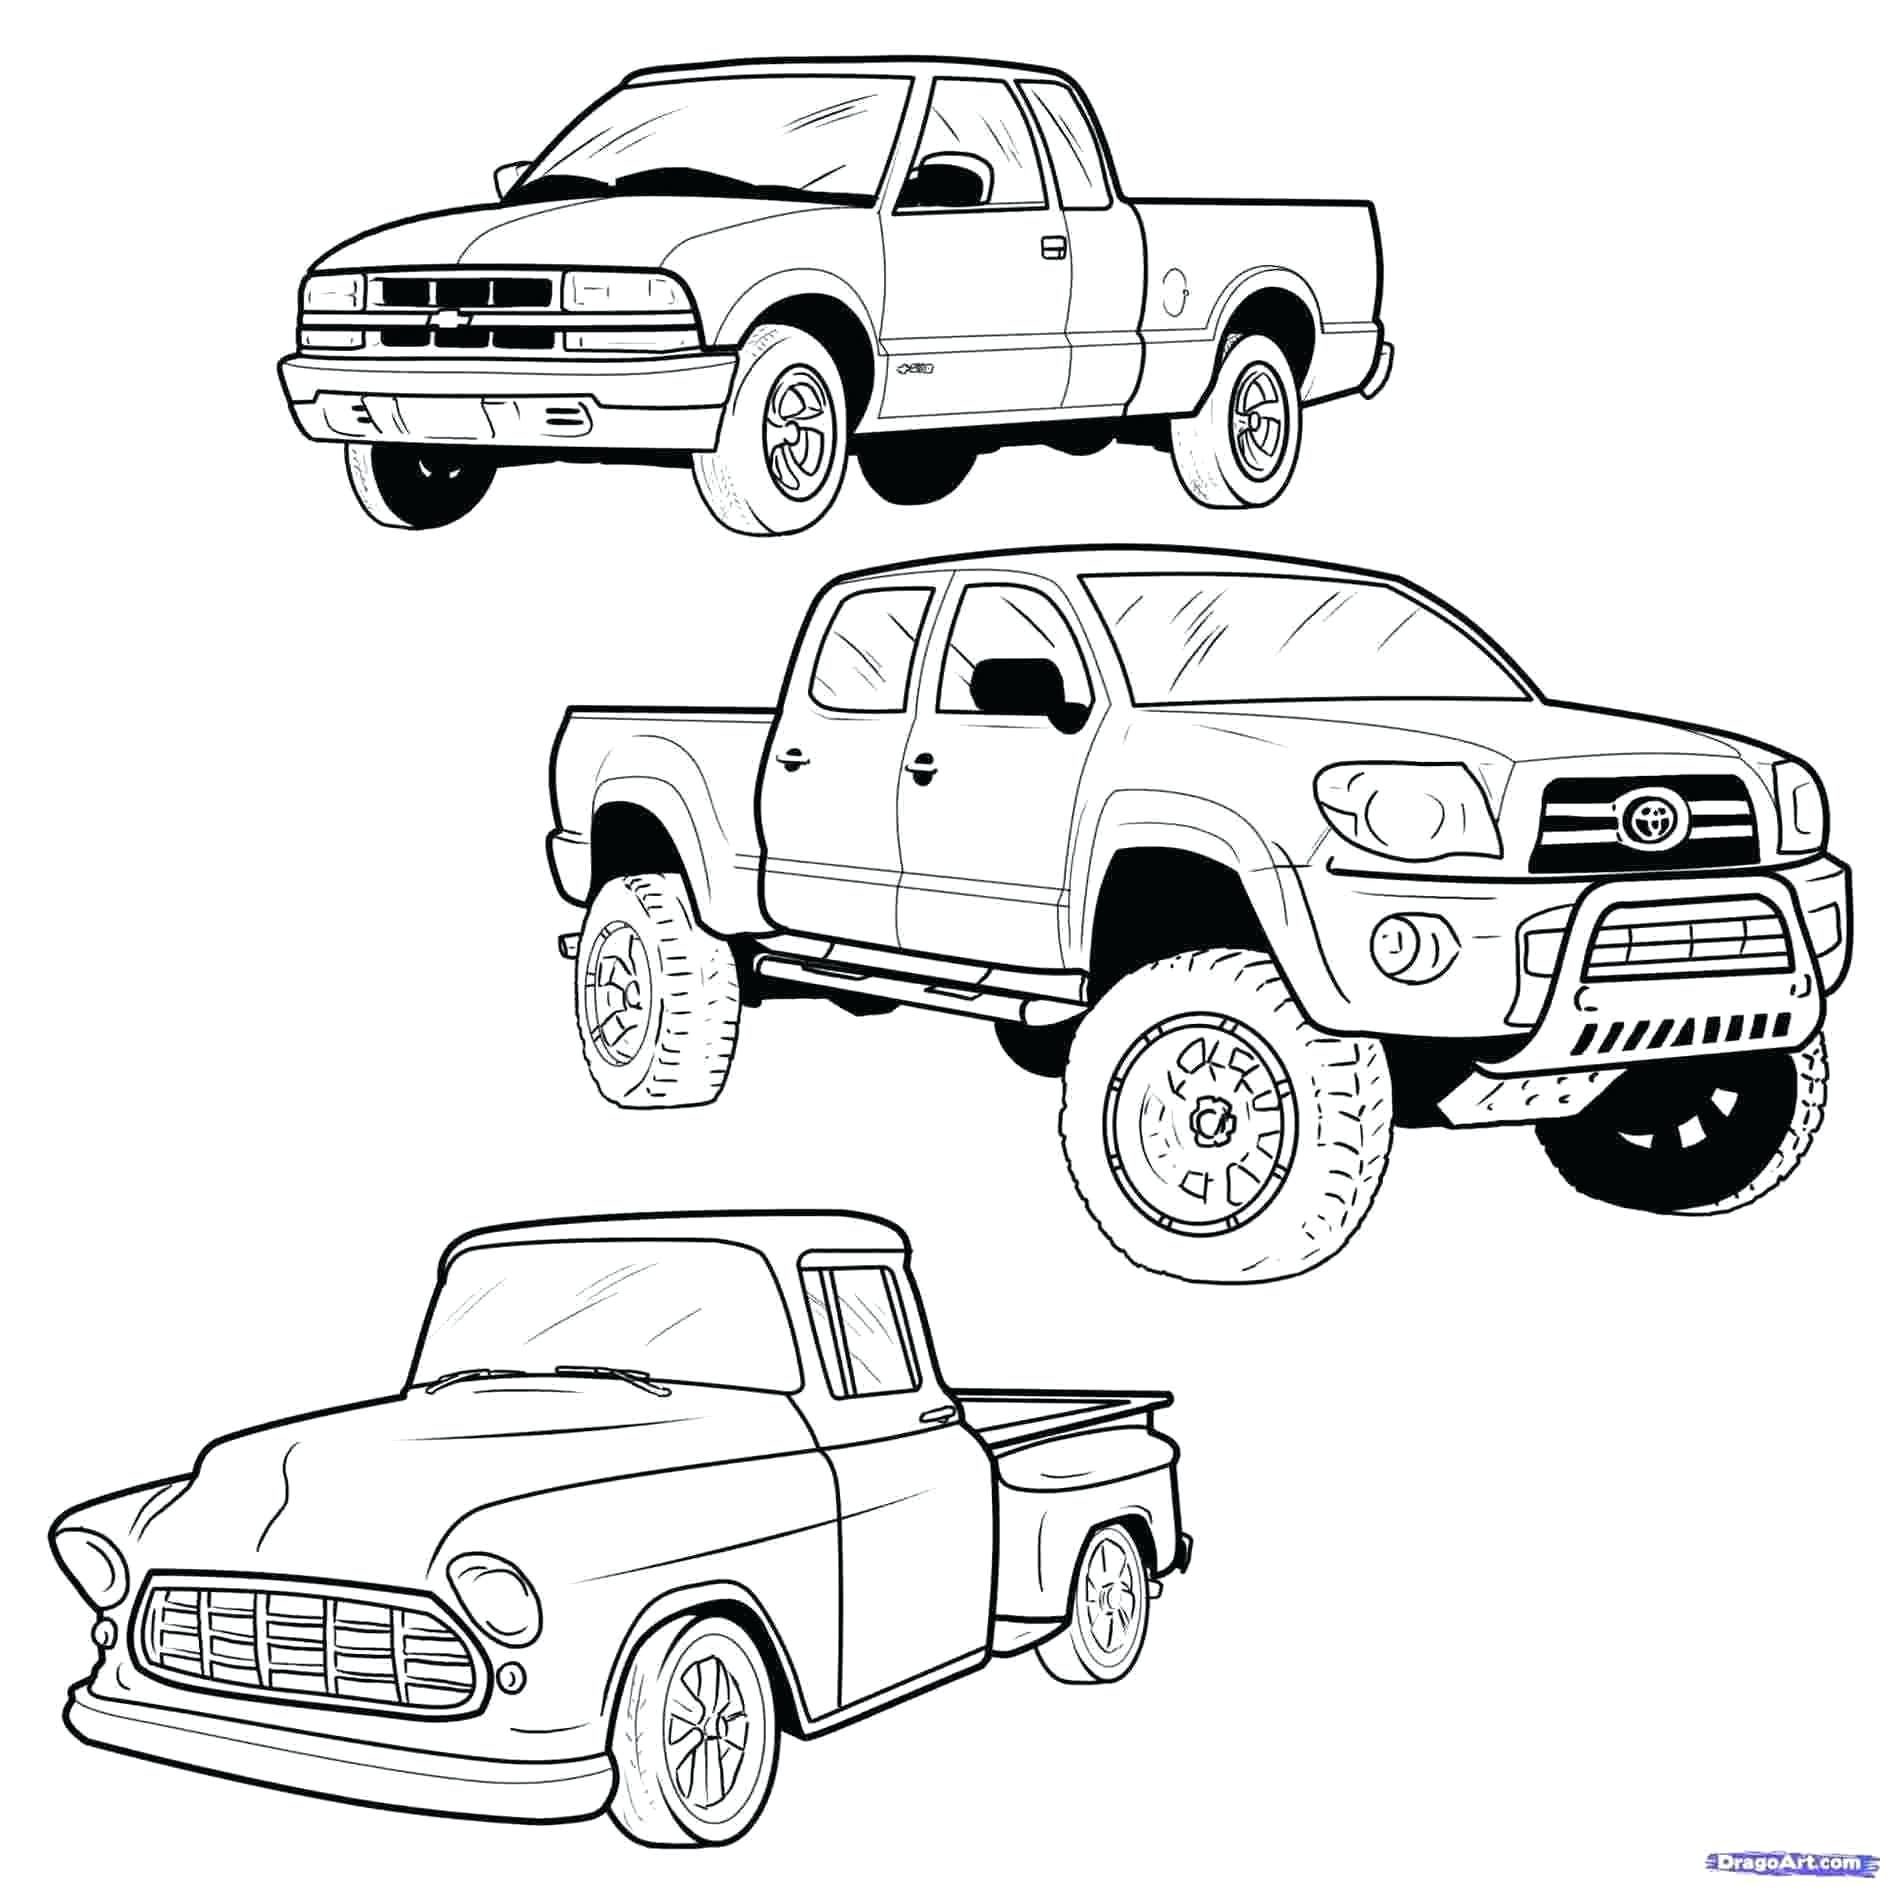 Chevy S10 Coloring Pages Coursity Me Tremendous Pickup Old Ford For Adults  – Dialogueeurope